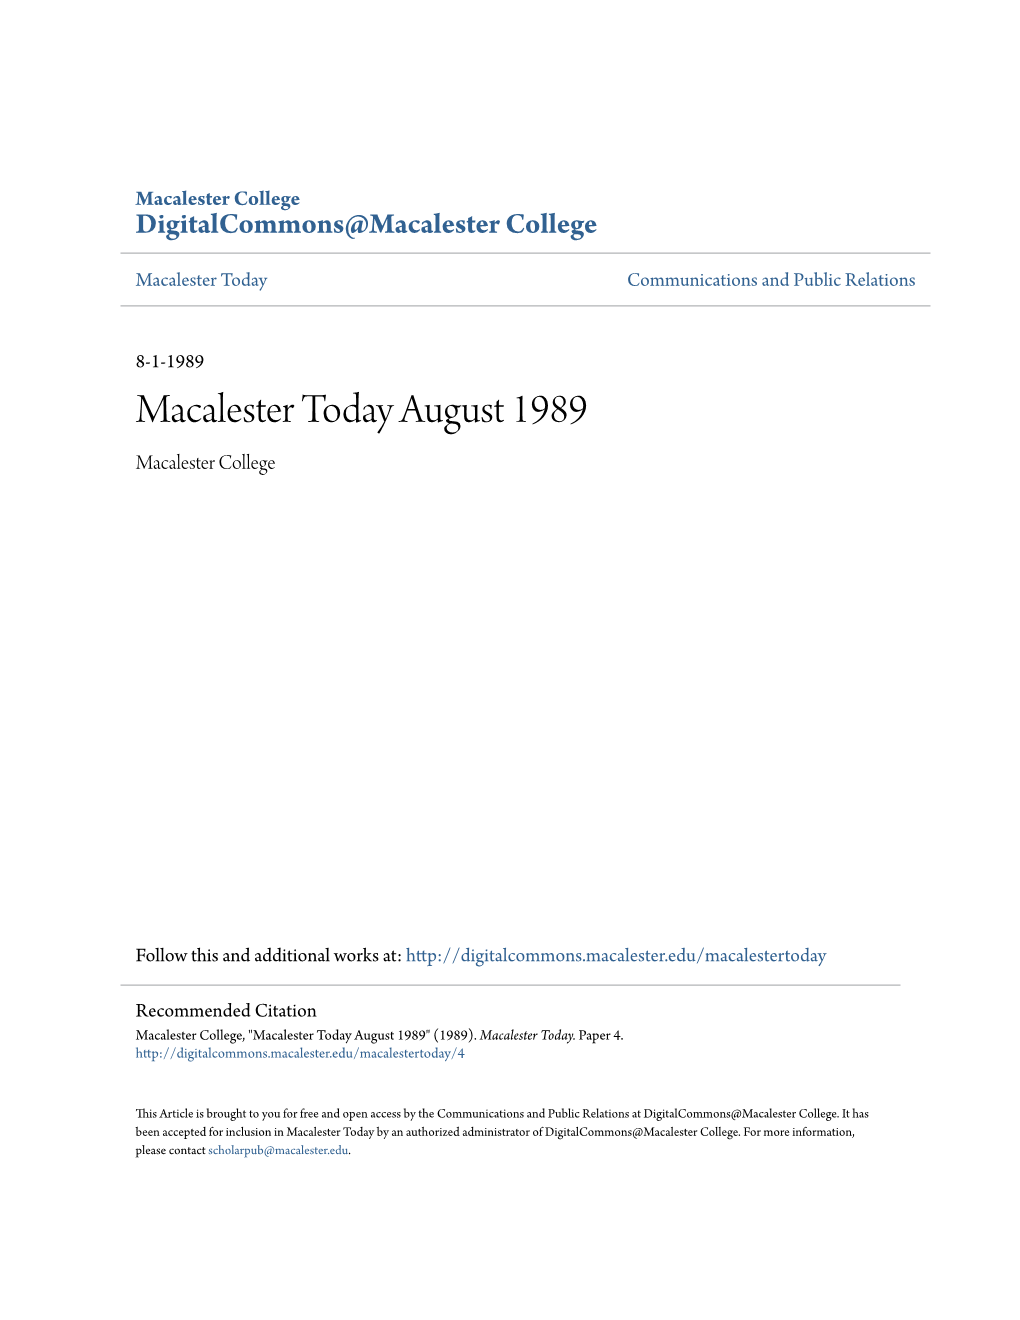 Macalester Today August 1989 Macalester College